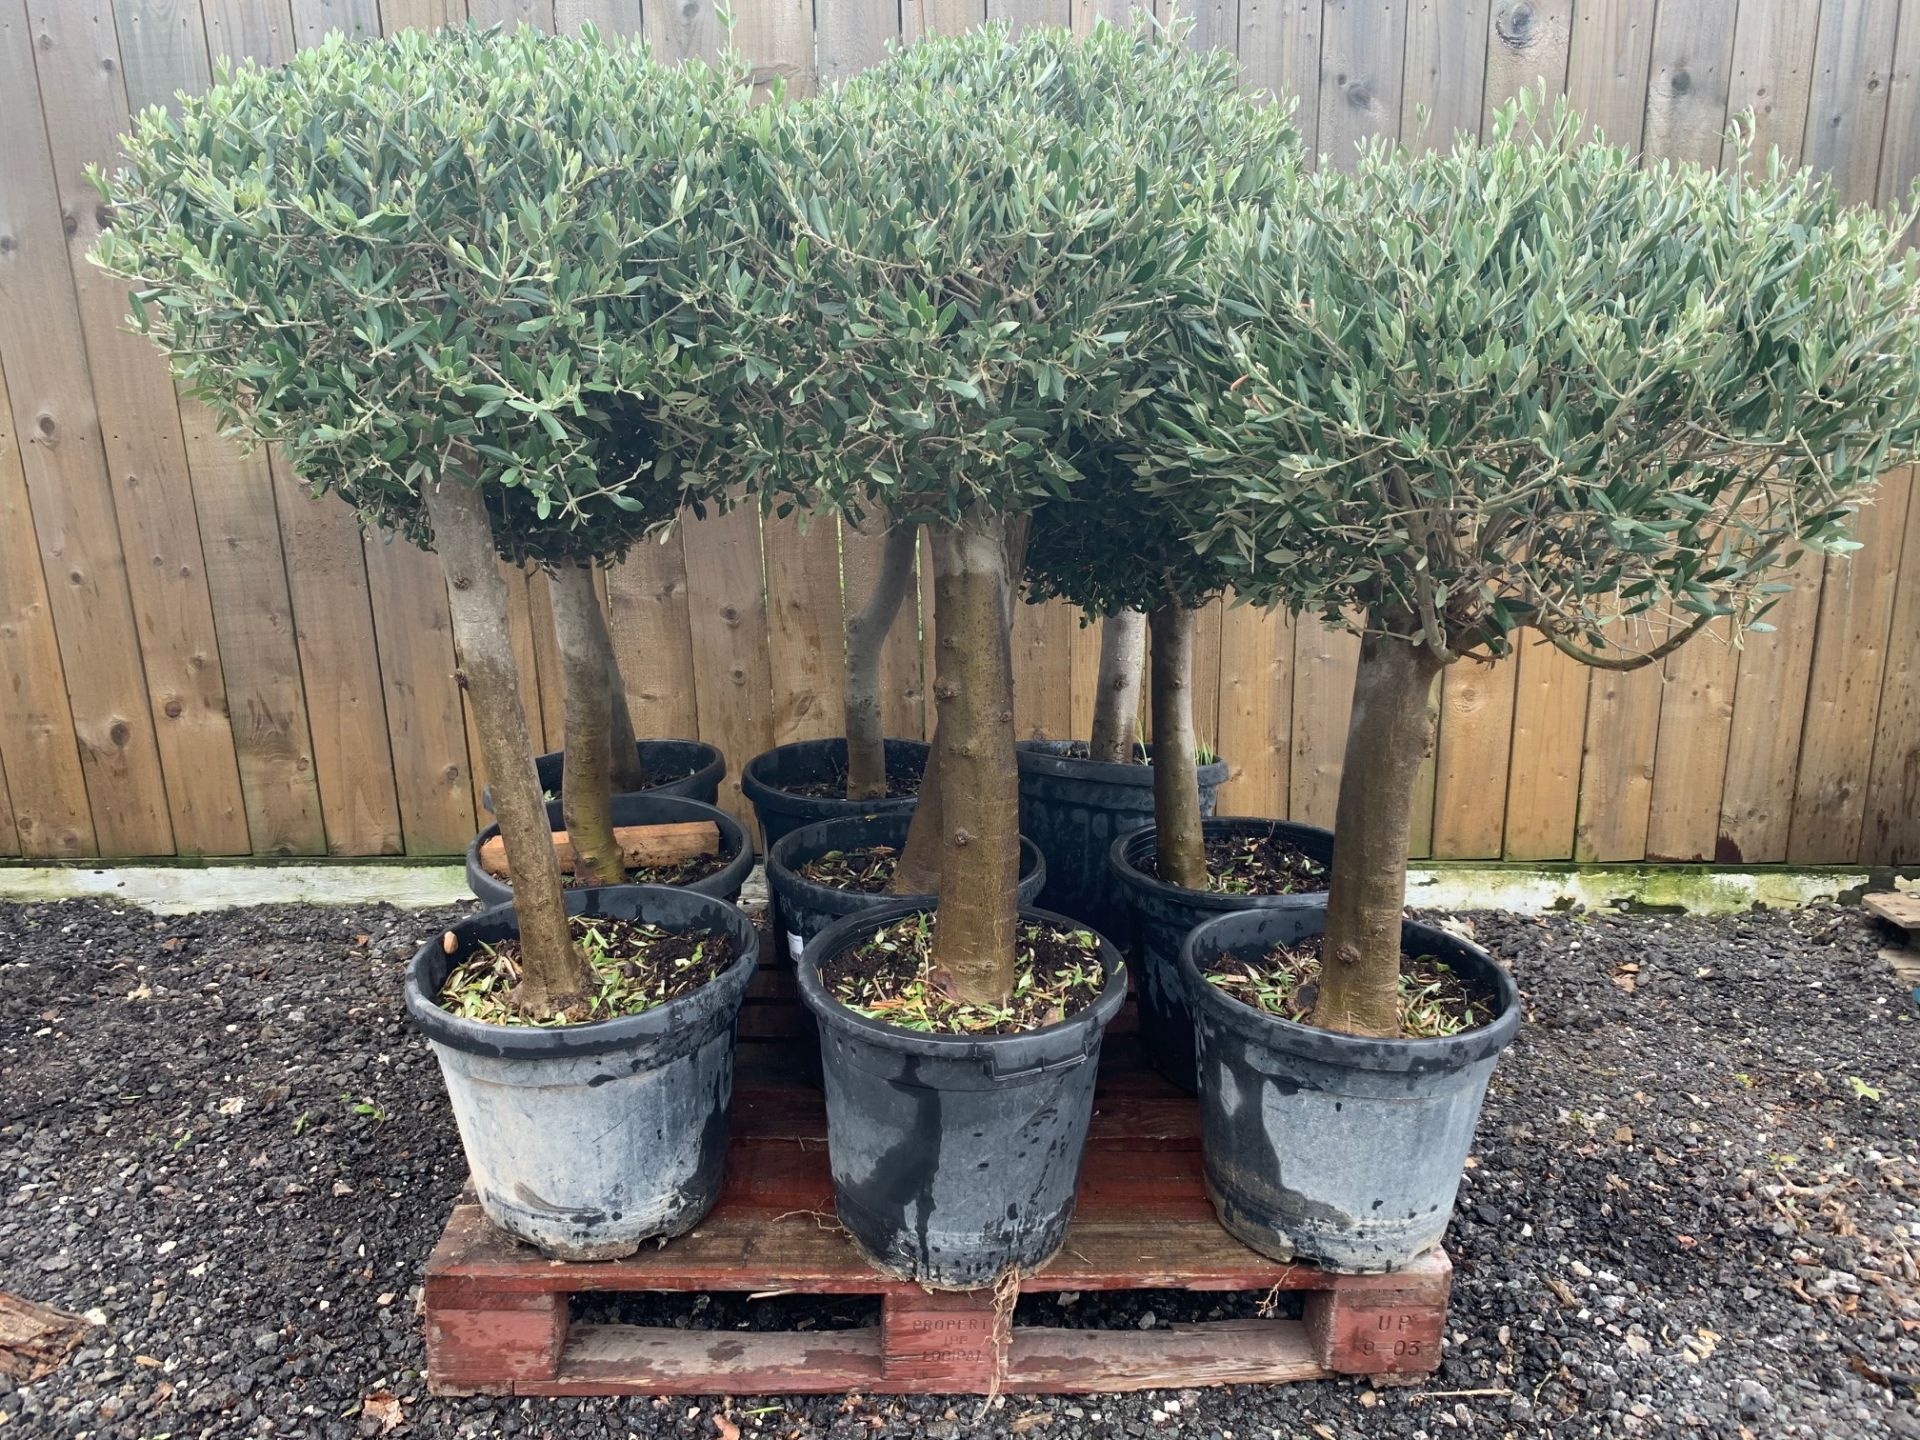 1 X HIGH QUALITY TALL AGED OLIVE HANDSHAPED BALL TREES APPROX 1.3M HIGH